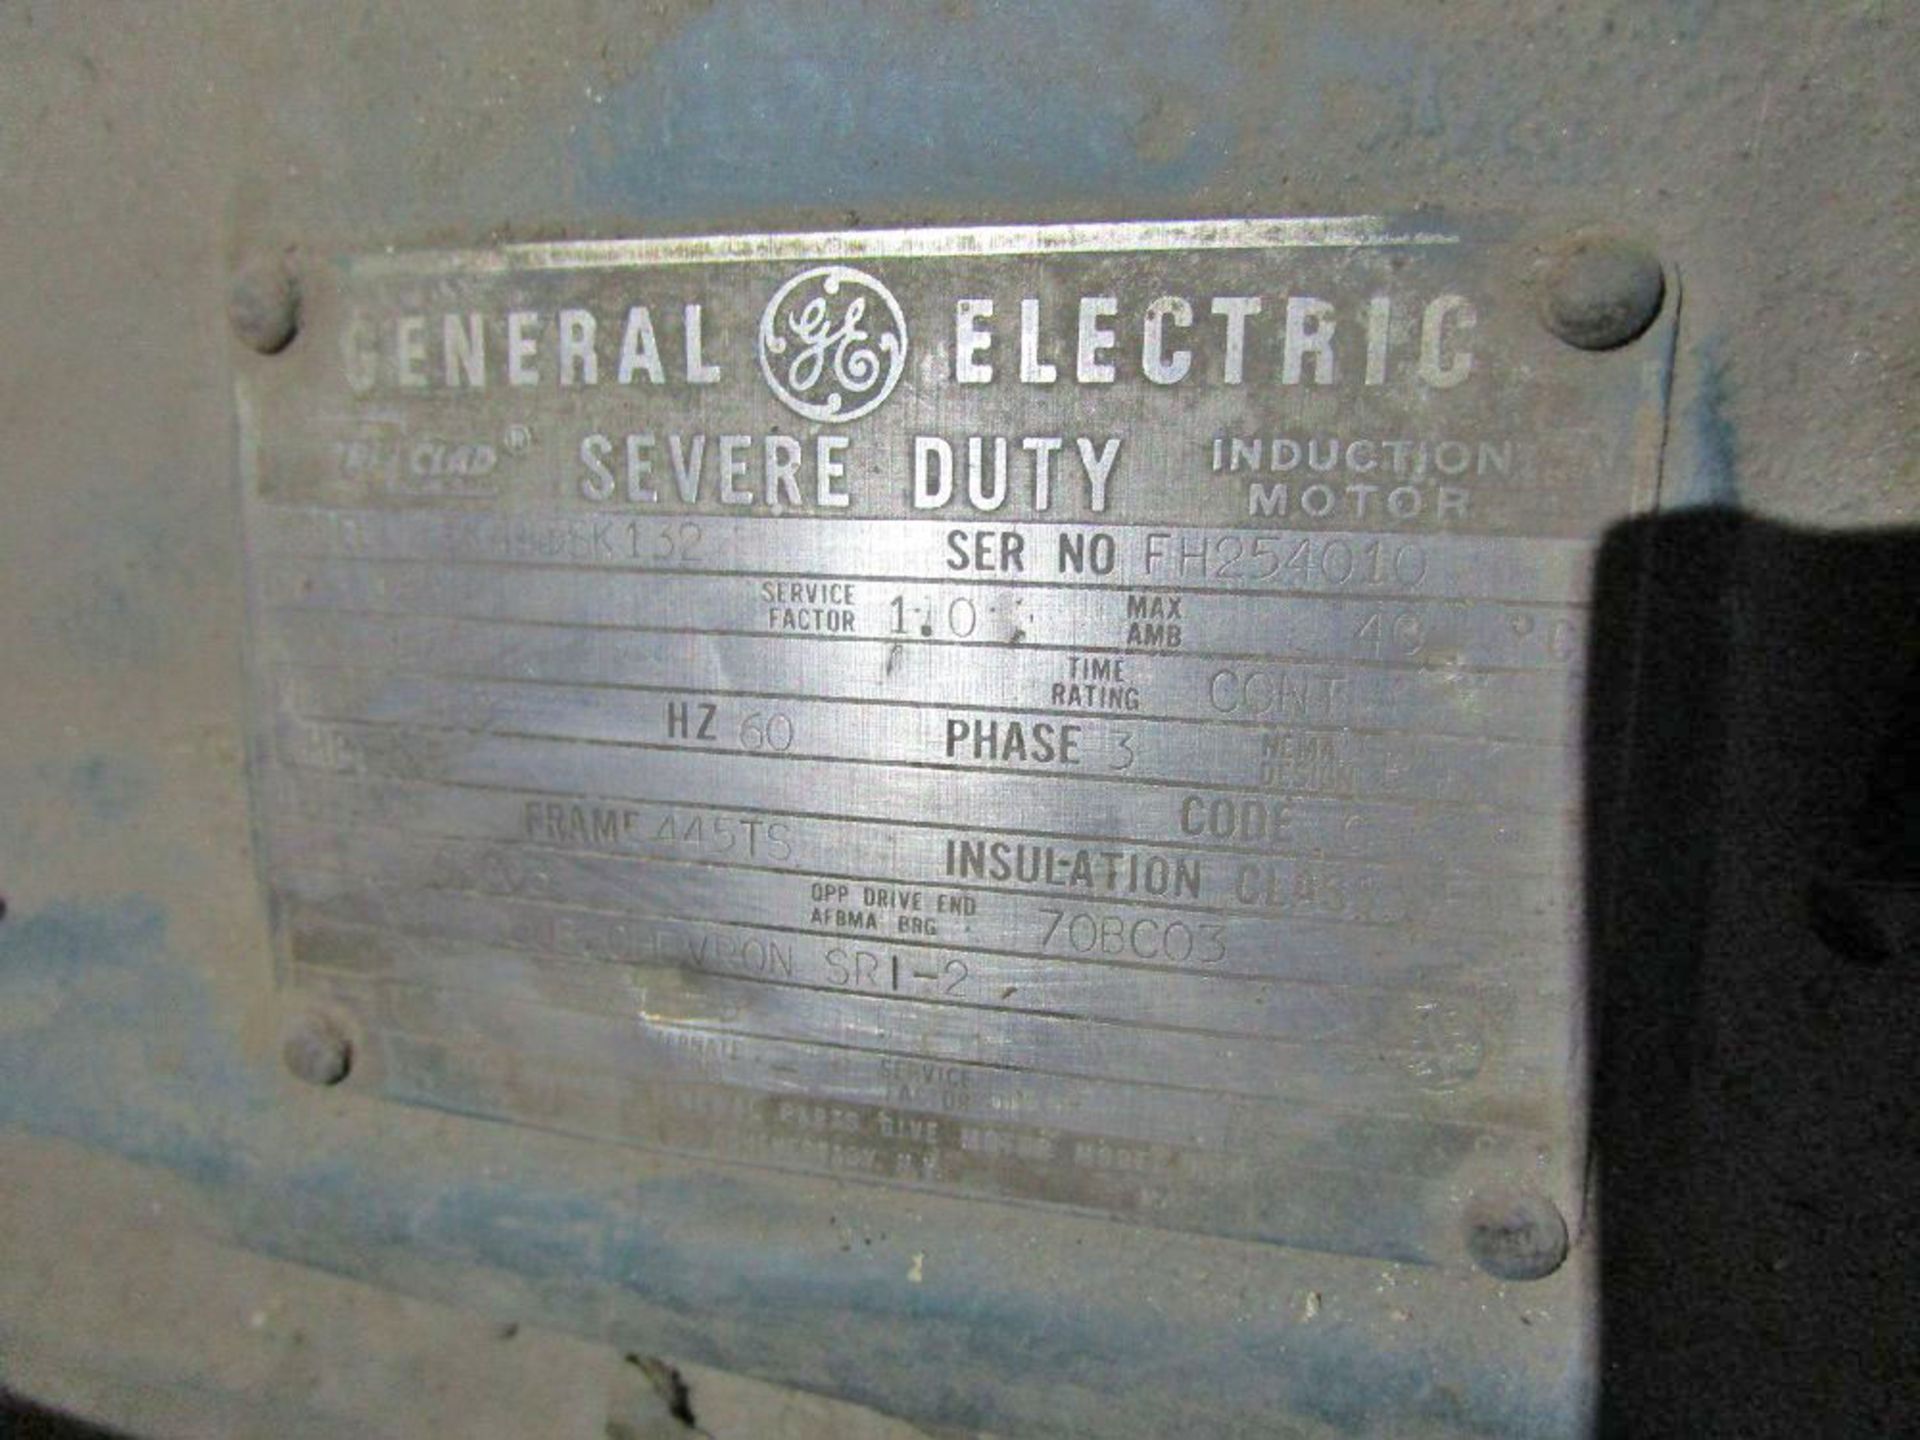 General Electric 150 HP Electric Induction Motor - Image 2 of 2